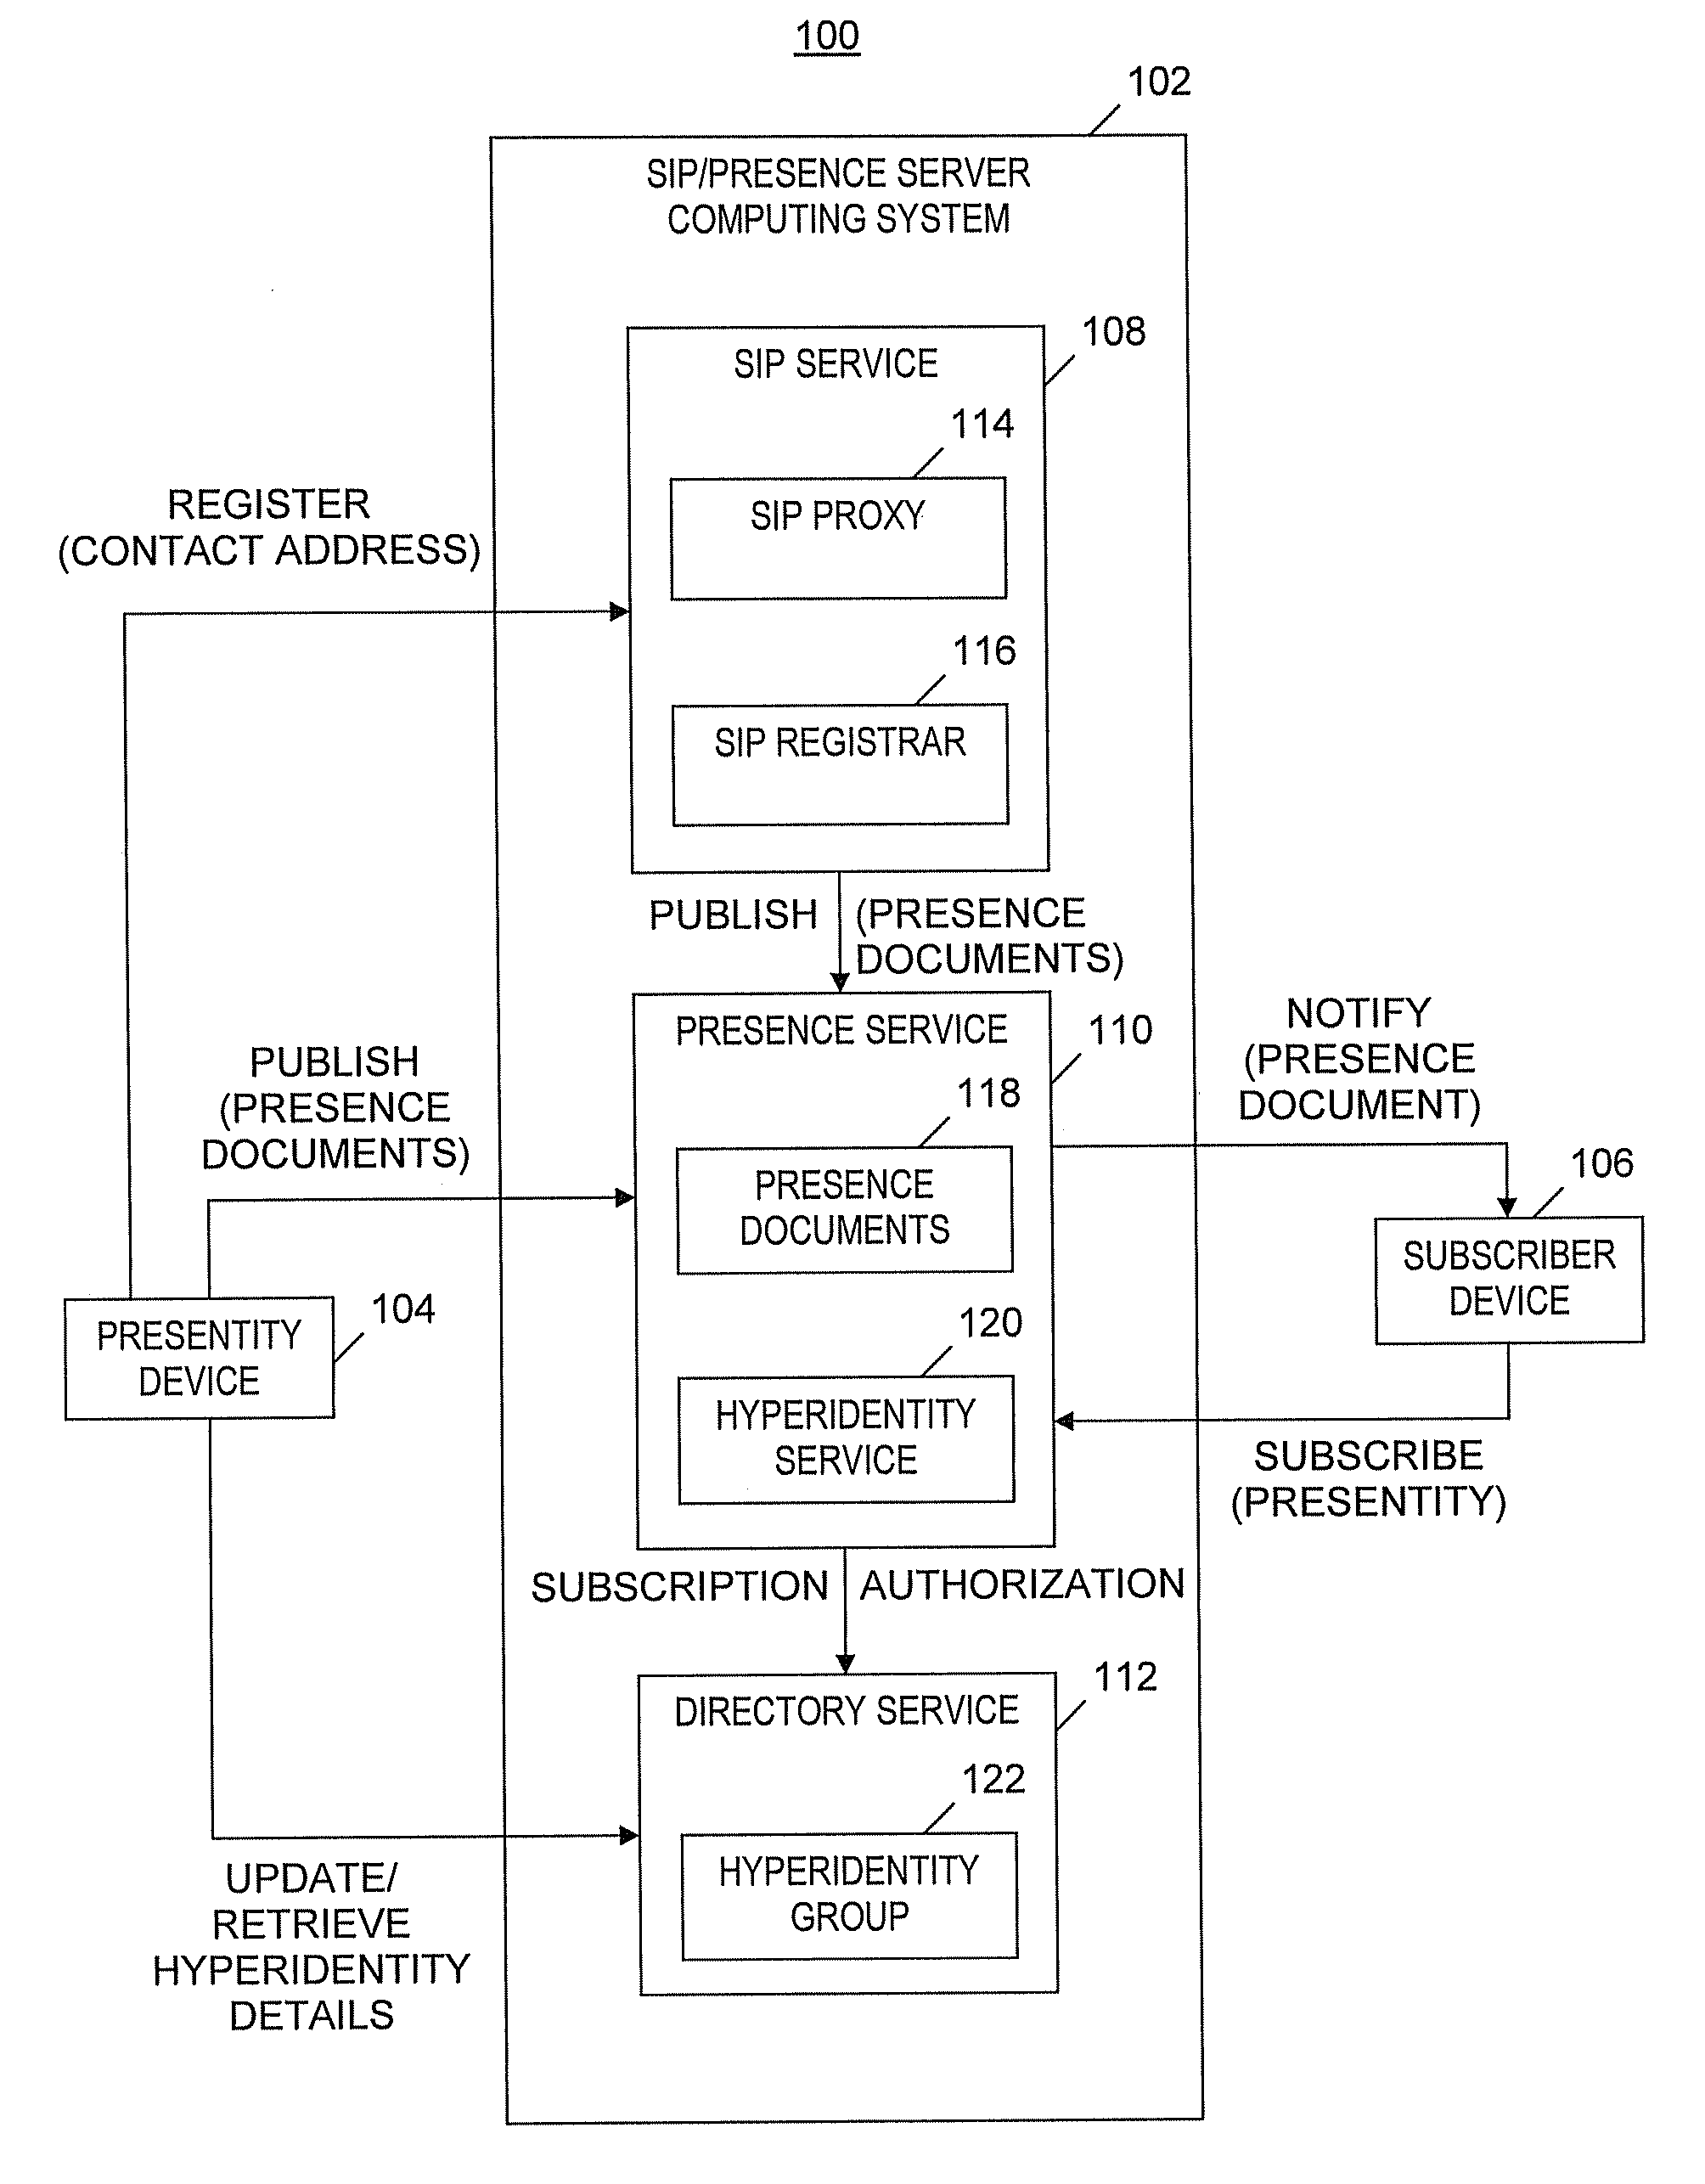 Automated call routing based on an active presence profile